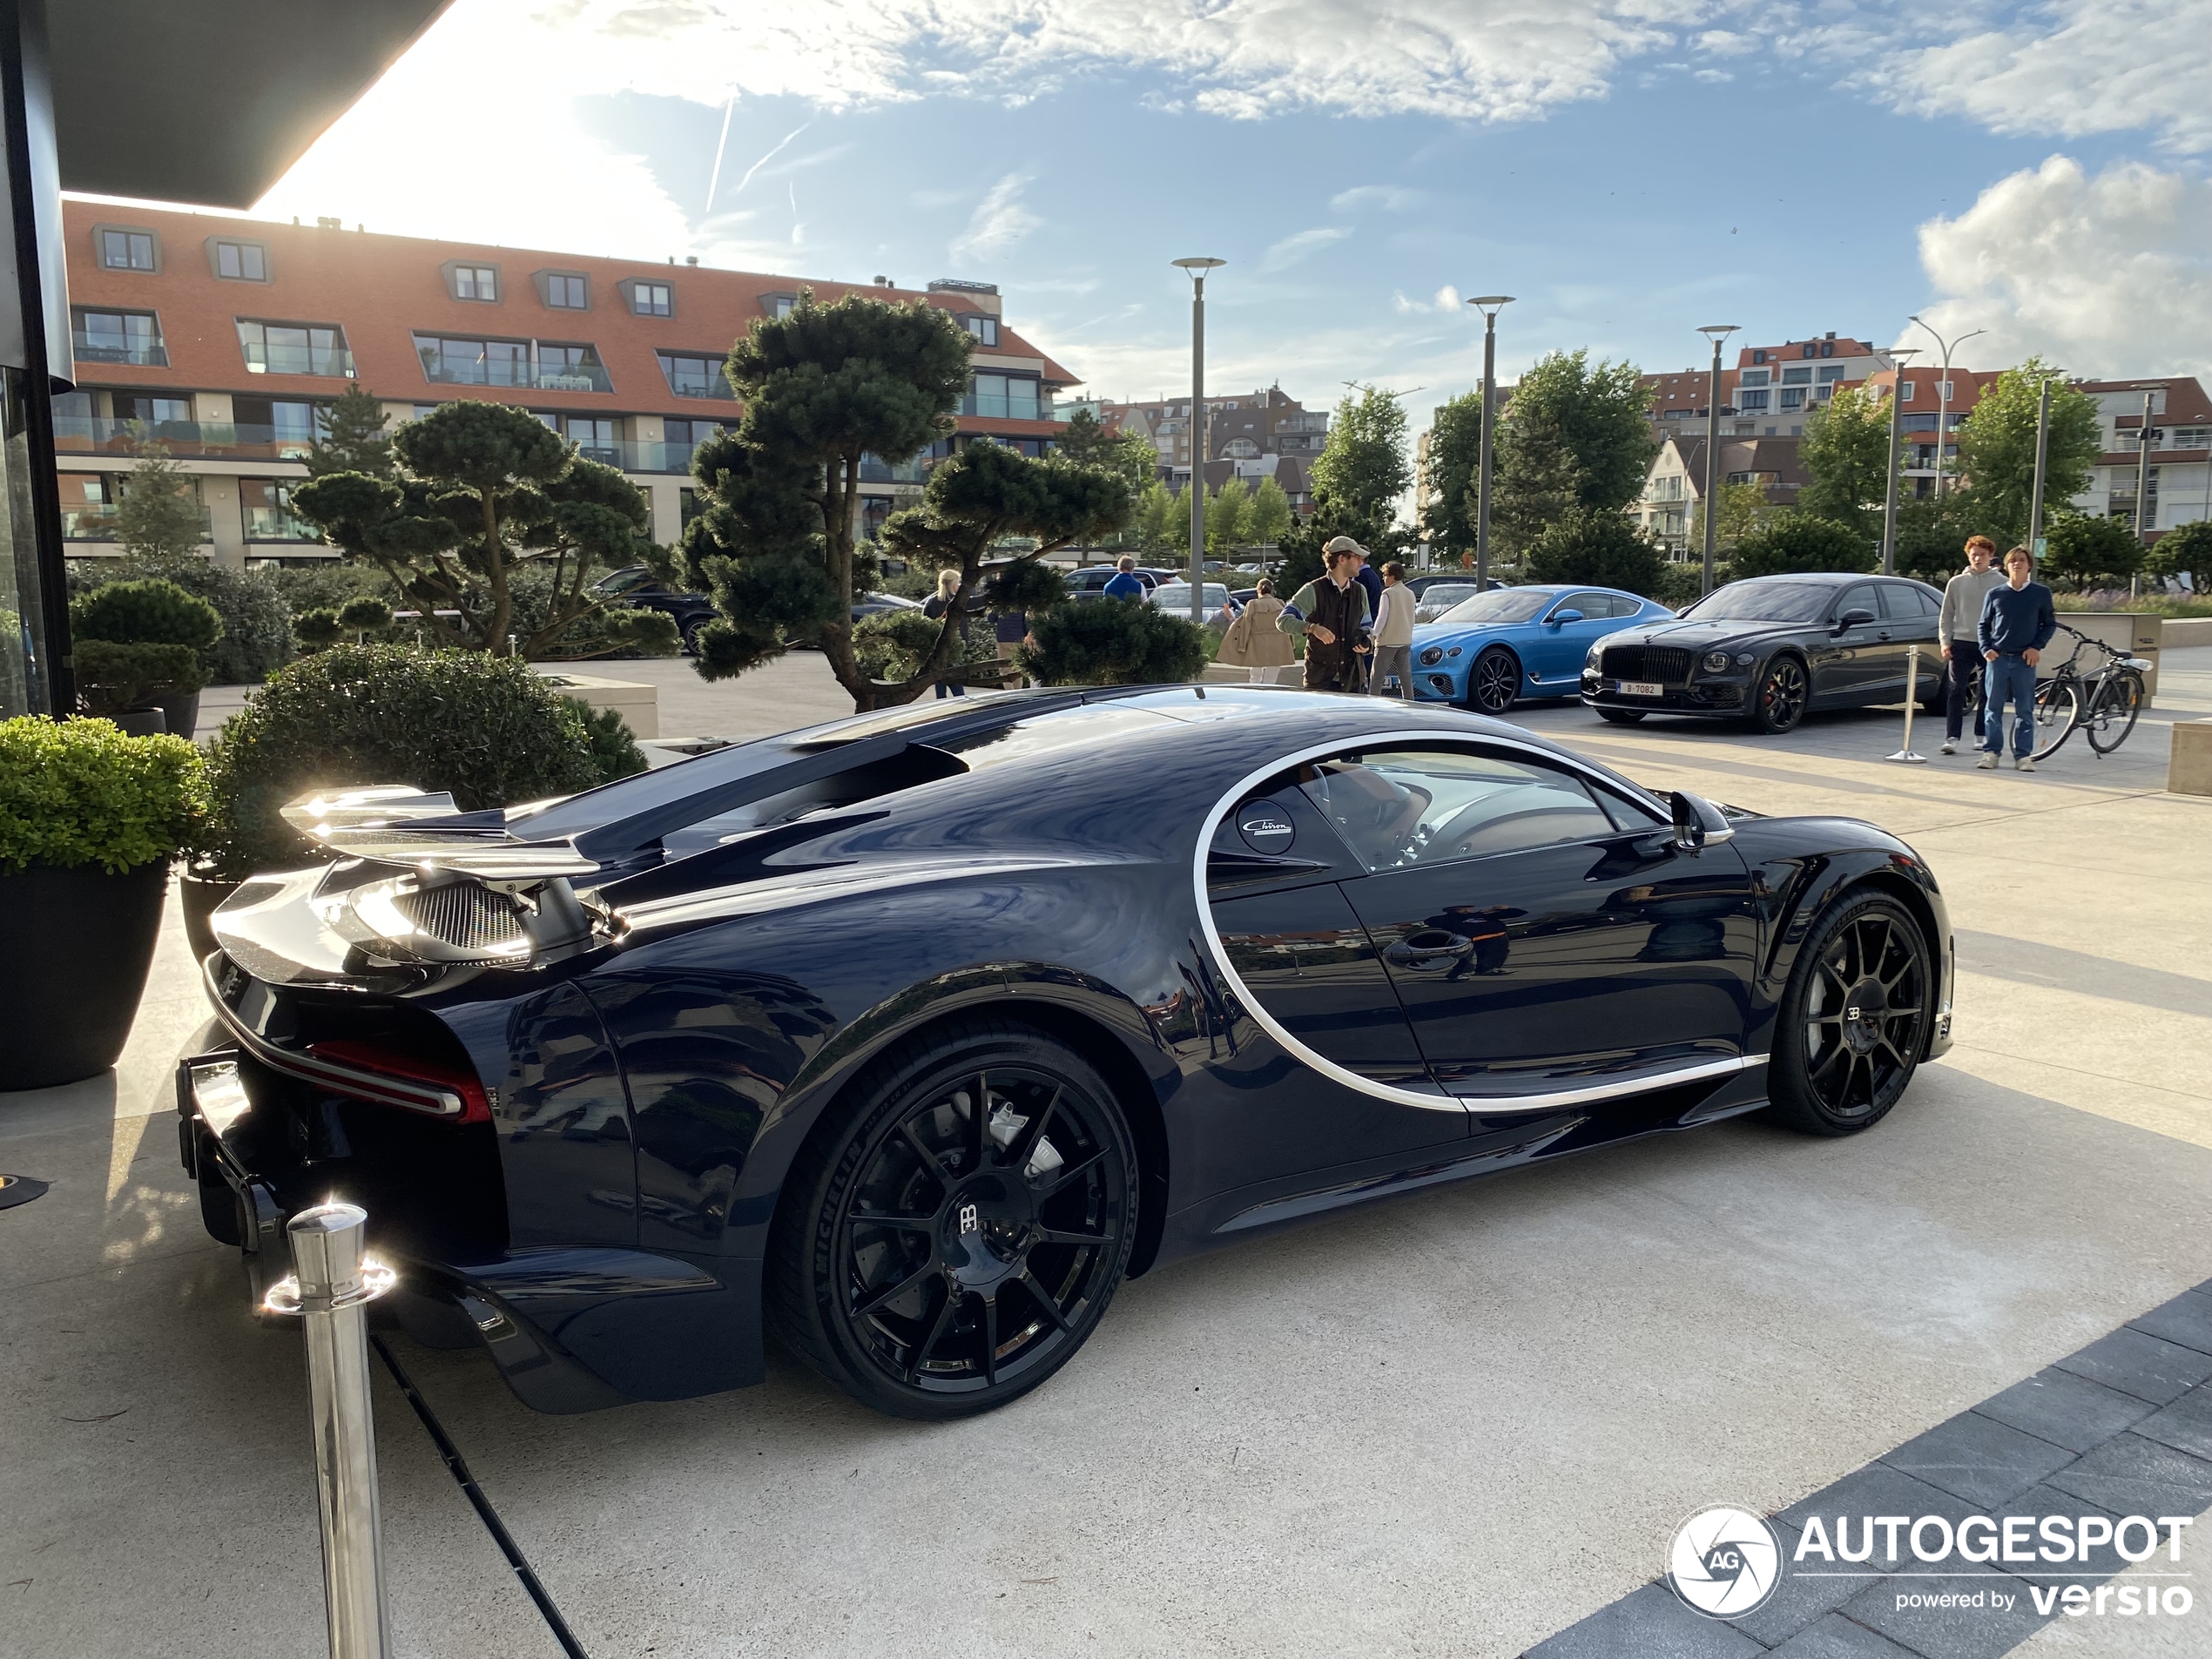 A new Chiron Super Sport shows up in Knokke-Heist